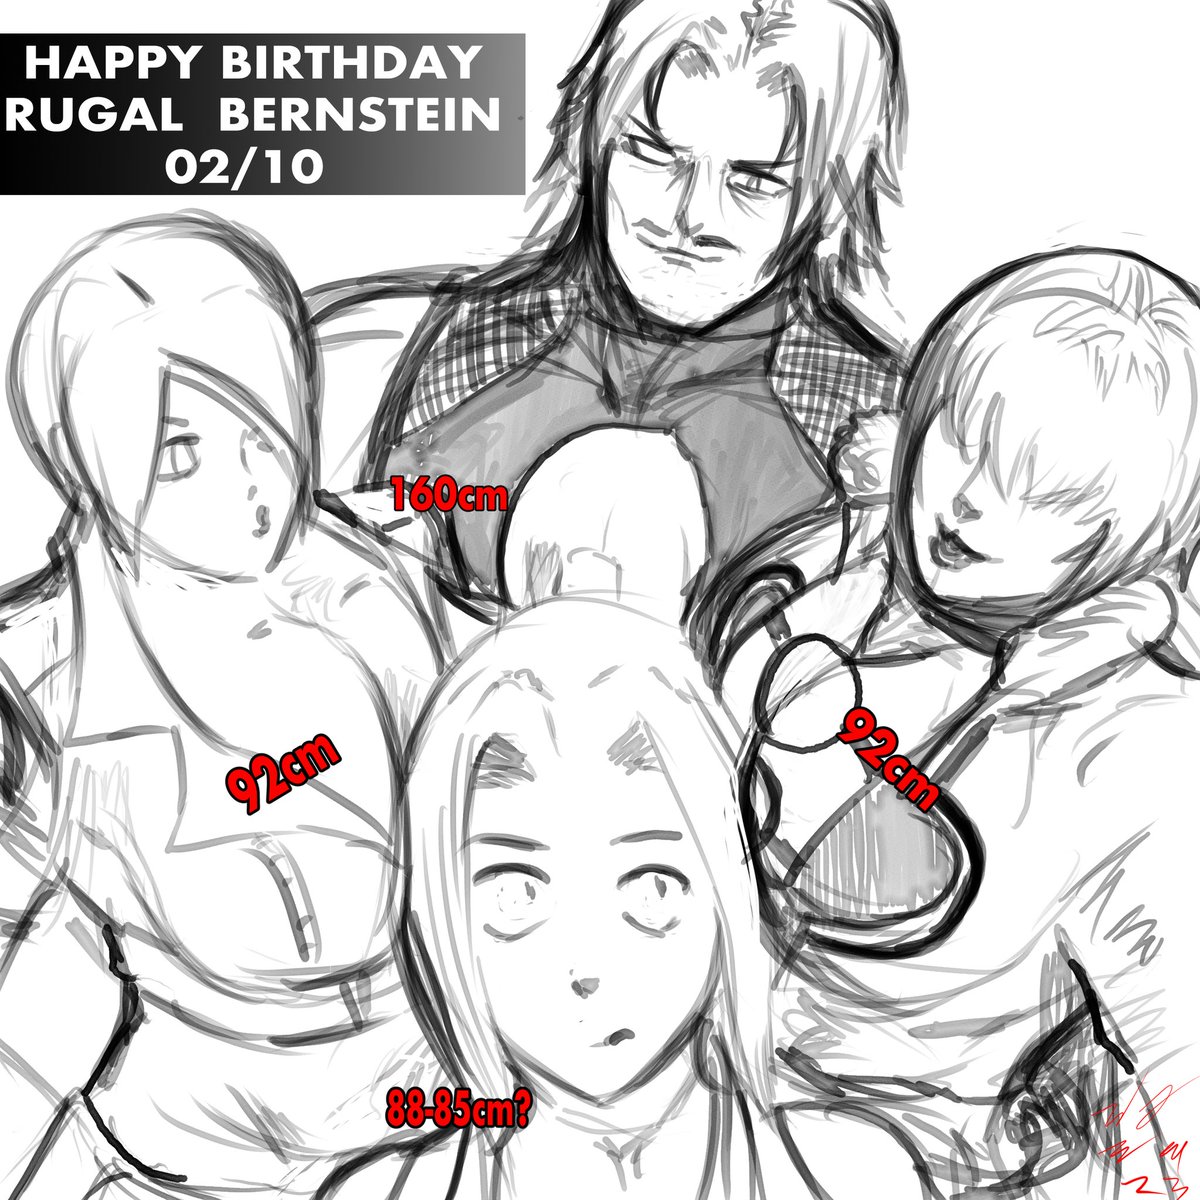 Happy Bday Rugal 02/10
I remember seeing a boob size chart resurfacing recently. What I didn't know was King is bigger than Mai. Go fig
#happybirthday #kofxv #kof15 #rugalbernstein #thekingoffighters #angel #shermie #maishiranui #fgc #fightinggames #fightinggamecommunity #doodle